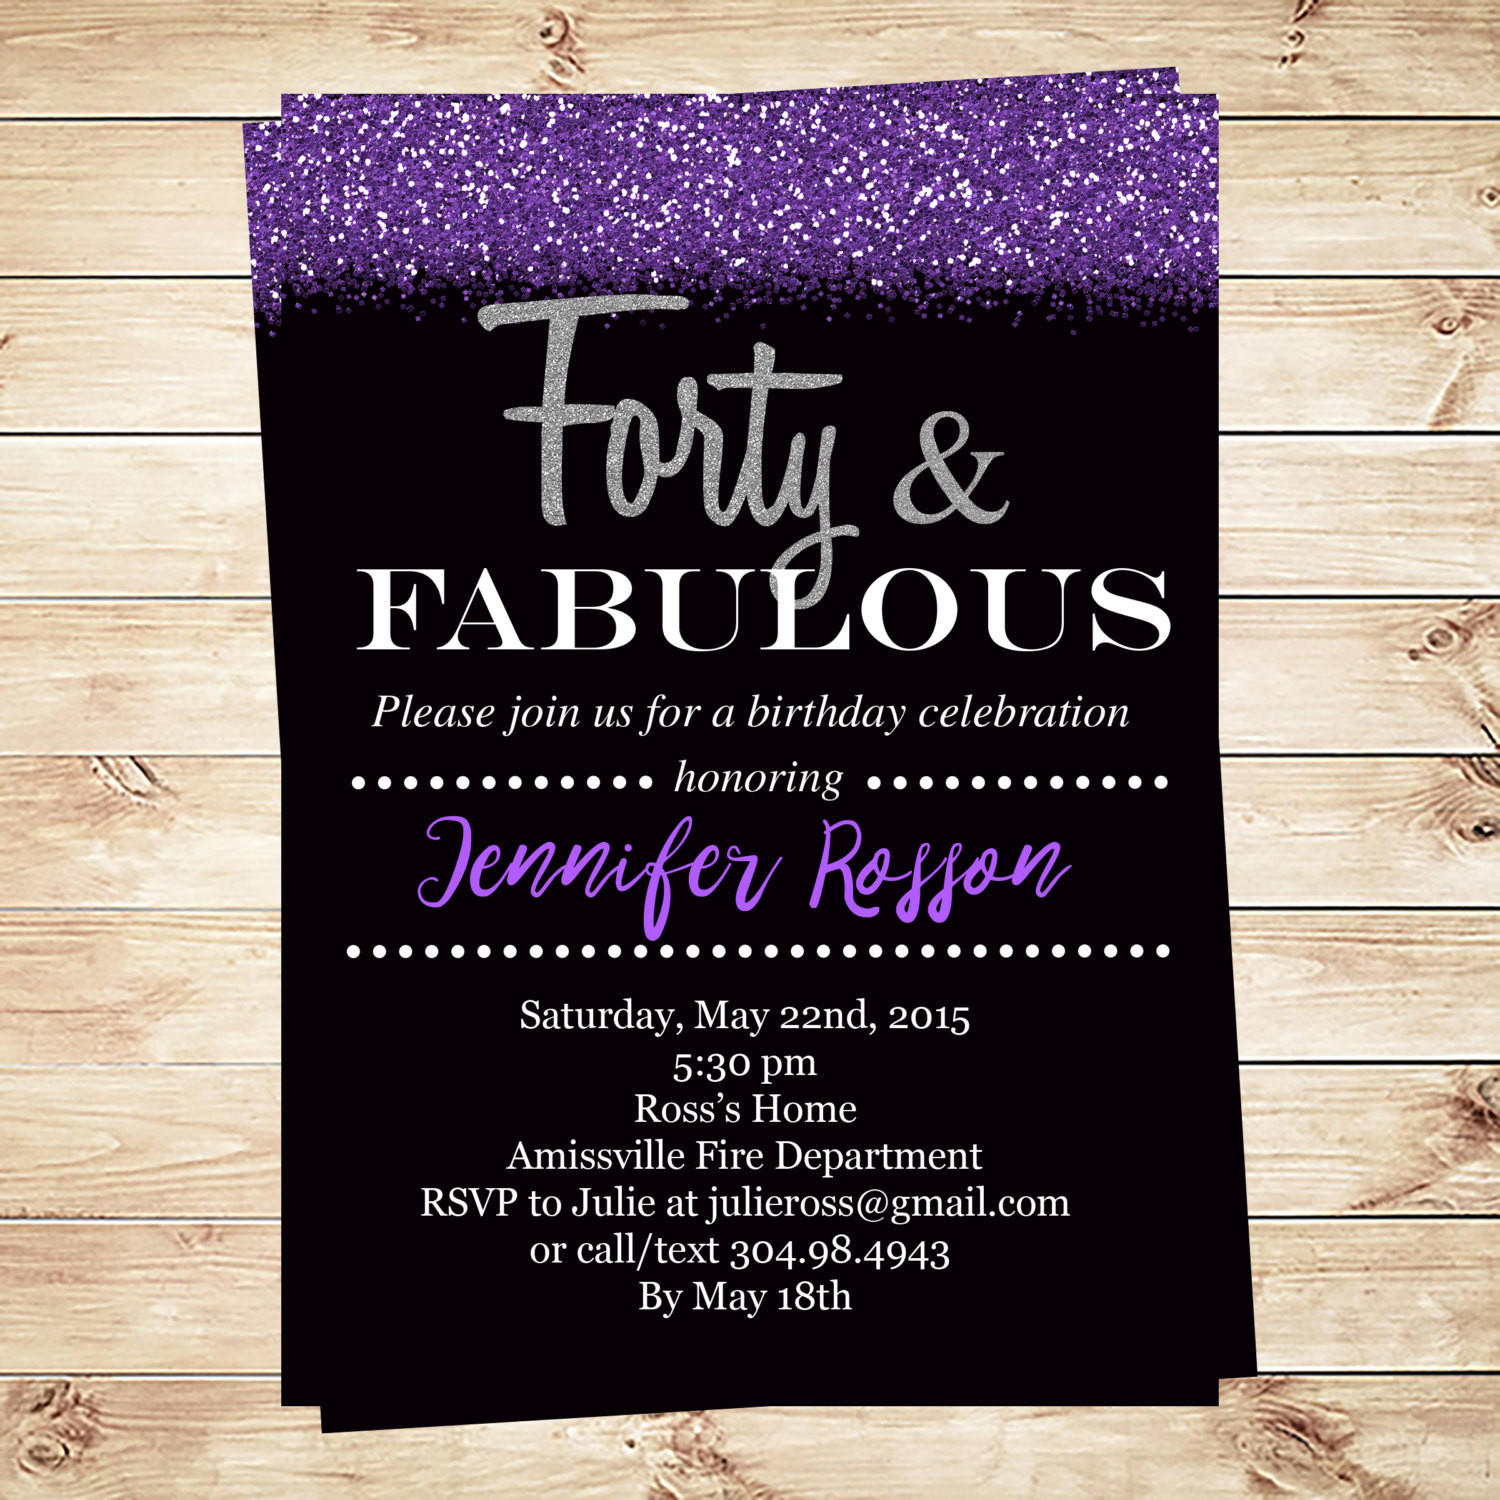 40th Birthday Party Invitations
 Forty and Fabulous Printable Party Invitations 40th Birthday